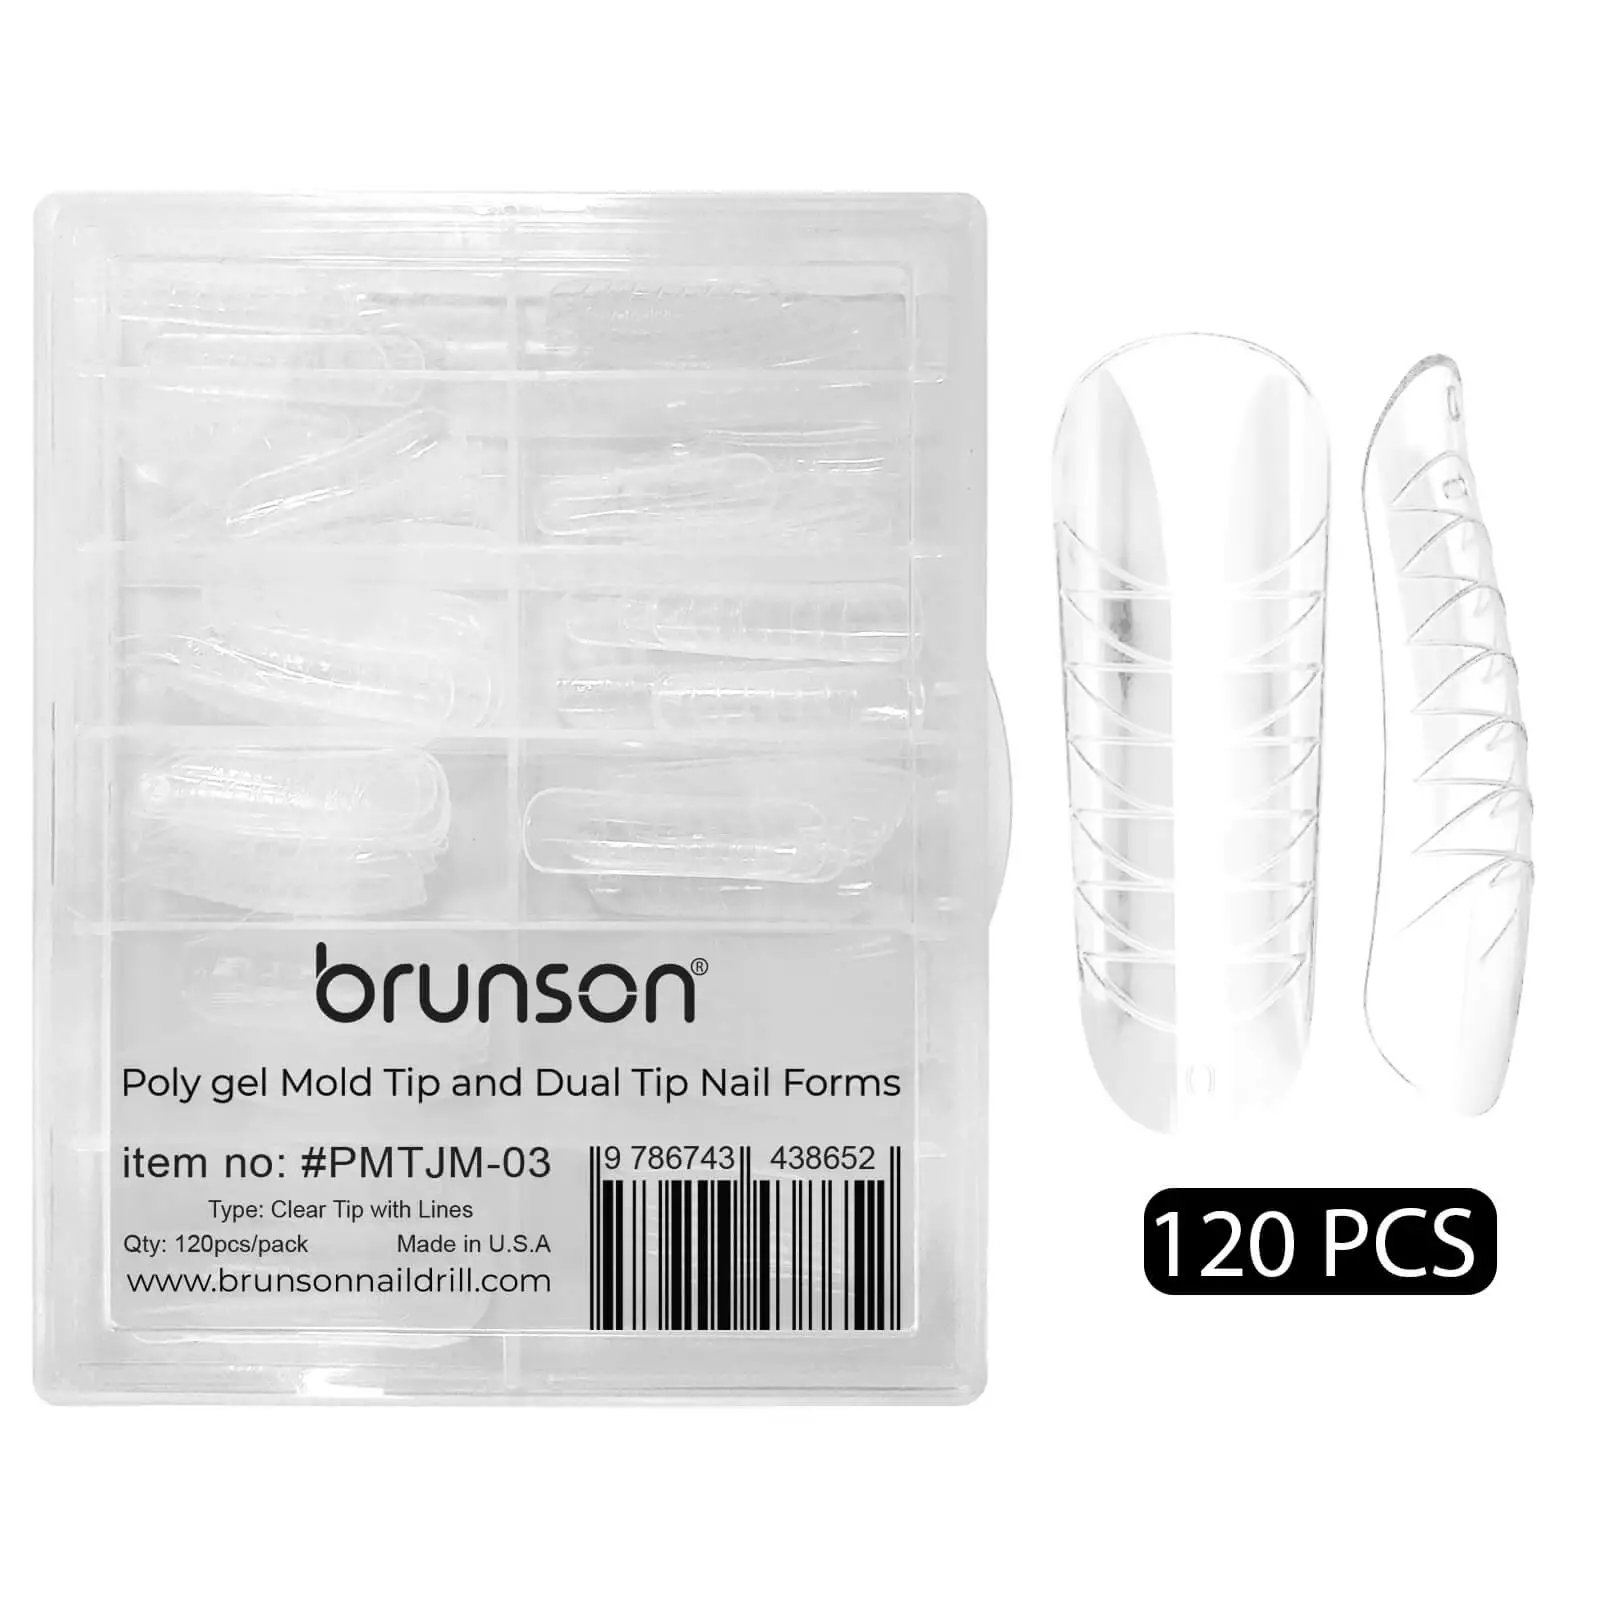 Poly-Gel-Mold-Tip-and-Dual-Tip-Nail-Forms-PMTJM-03-Brunson